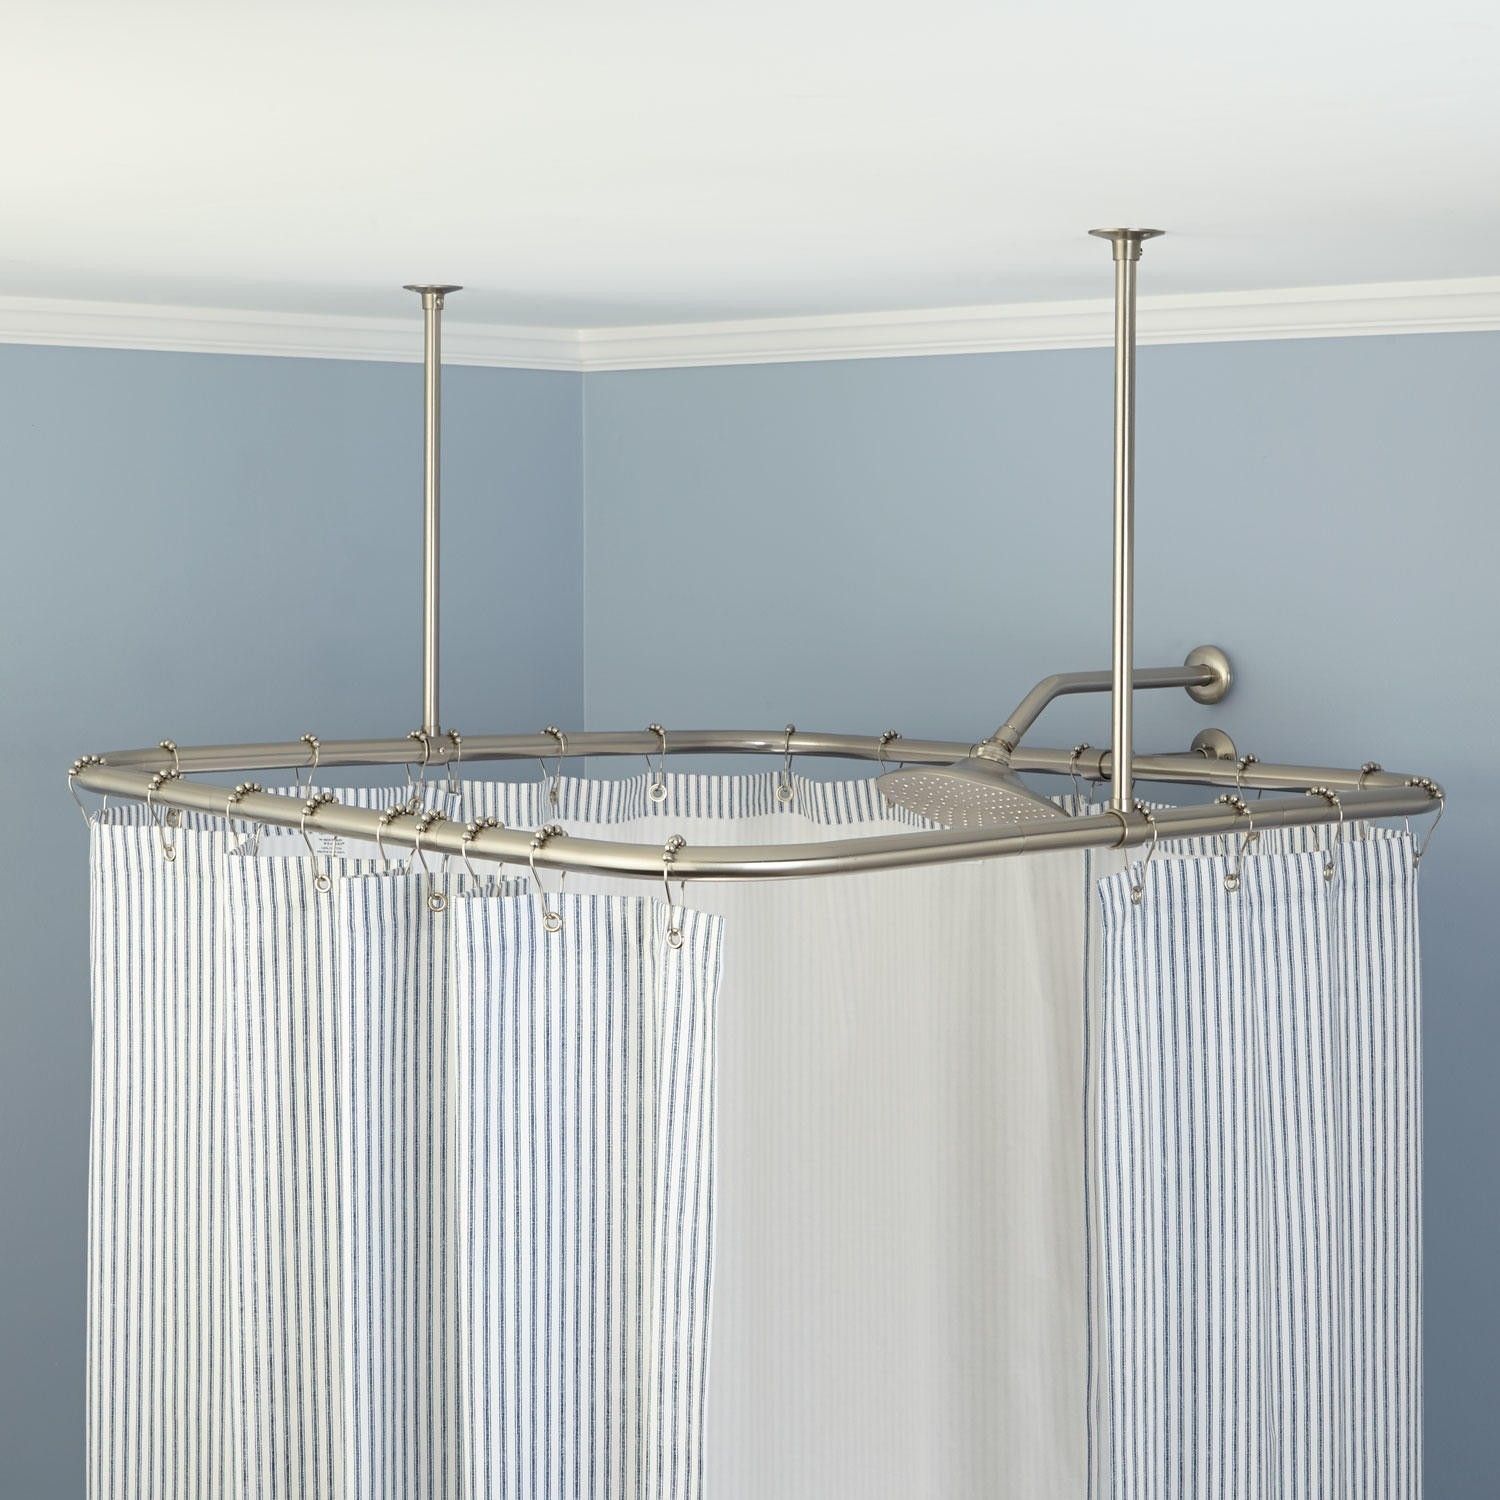 Startling Wall Mounted Shower Curtain Rod Bathroom Mount Gordyn Inside Shower Curtain Wall Mounts (Photo 2 of 25)